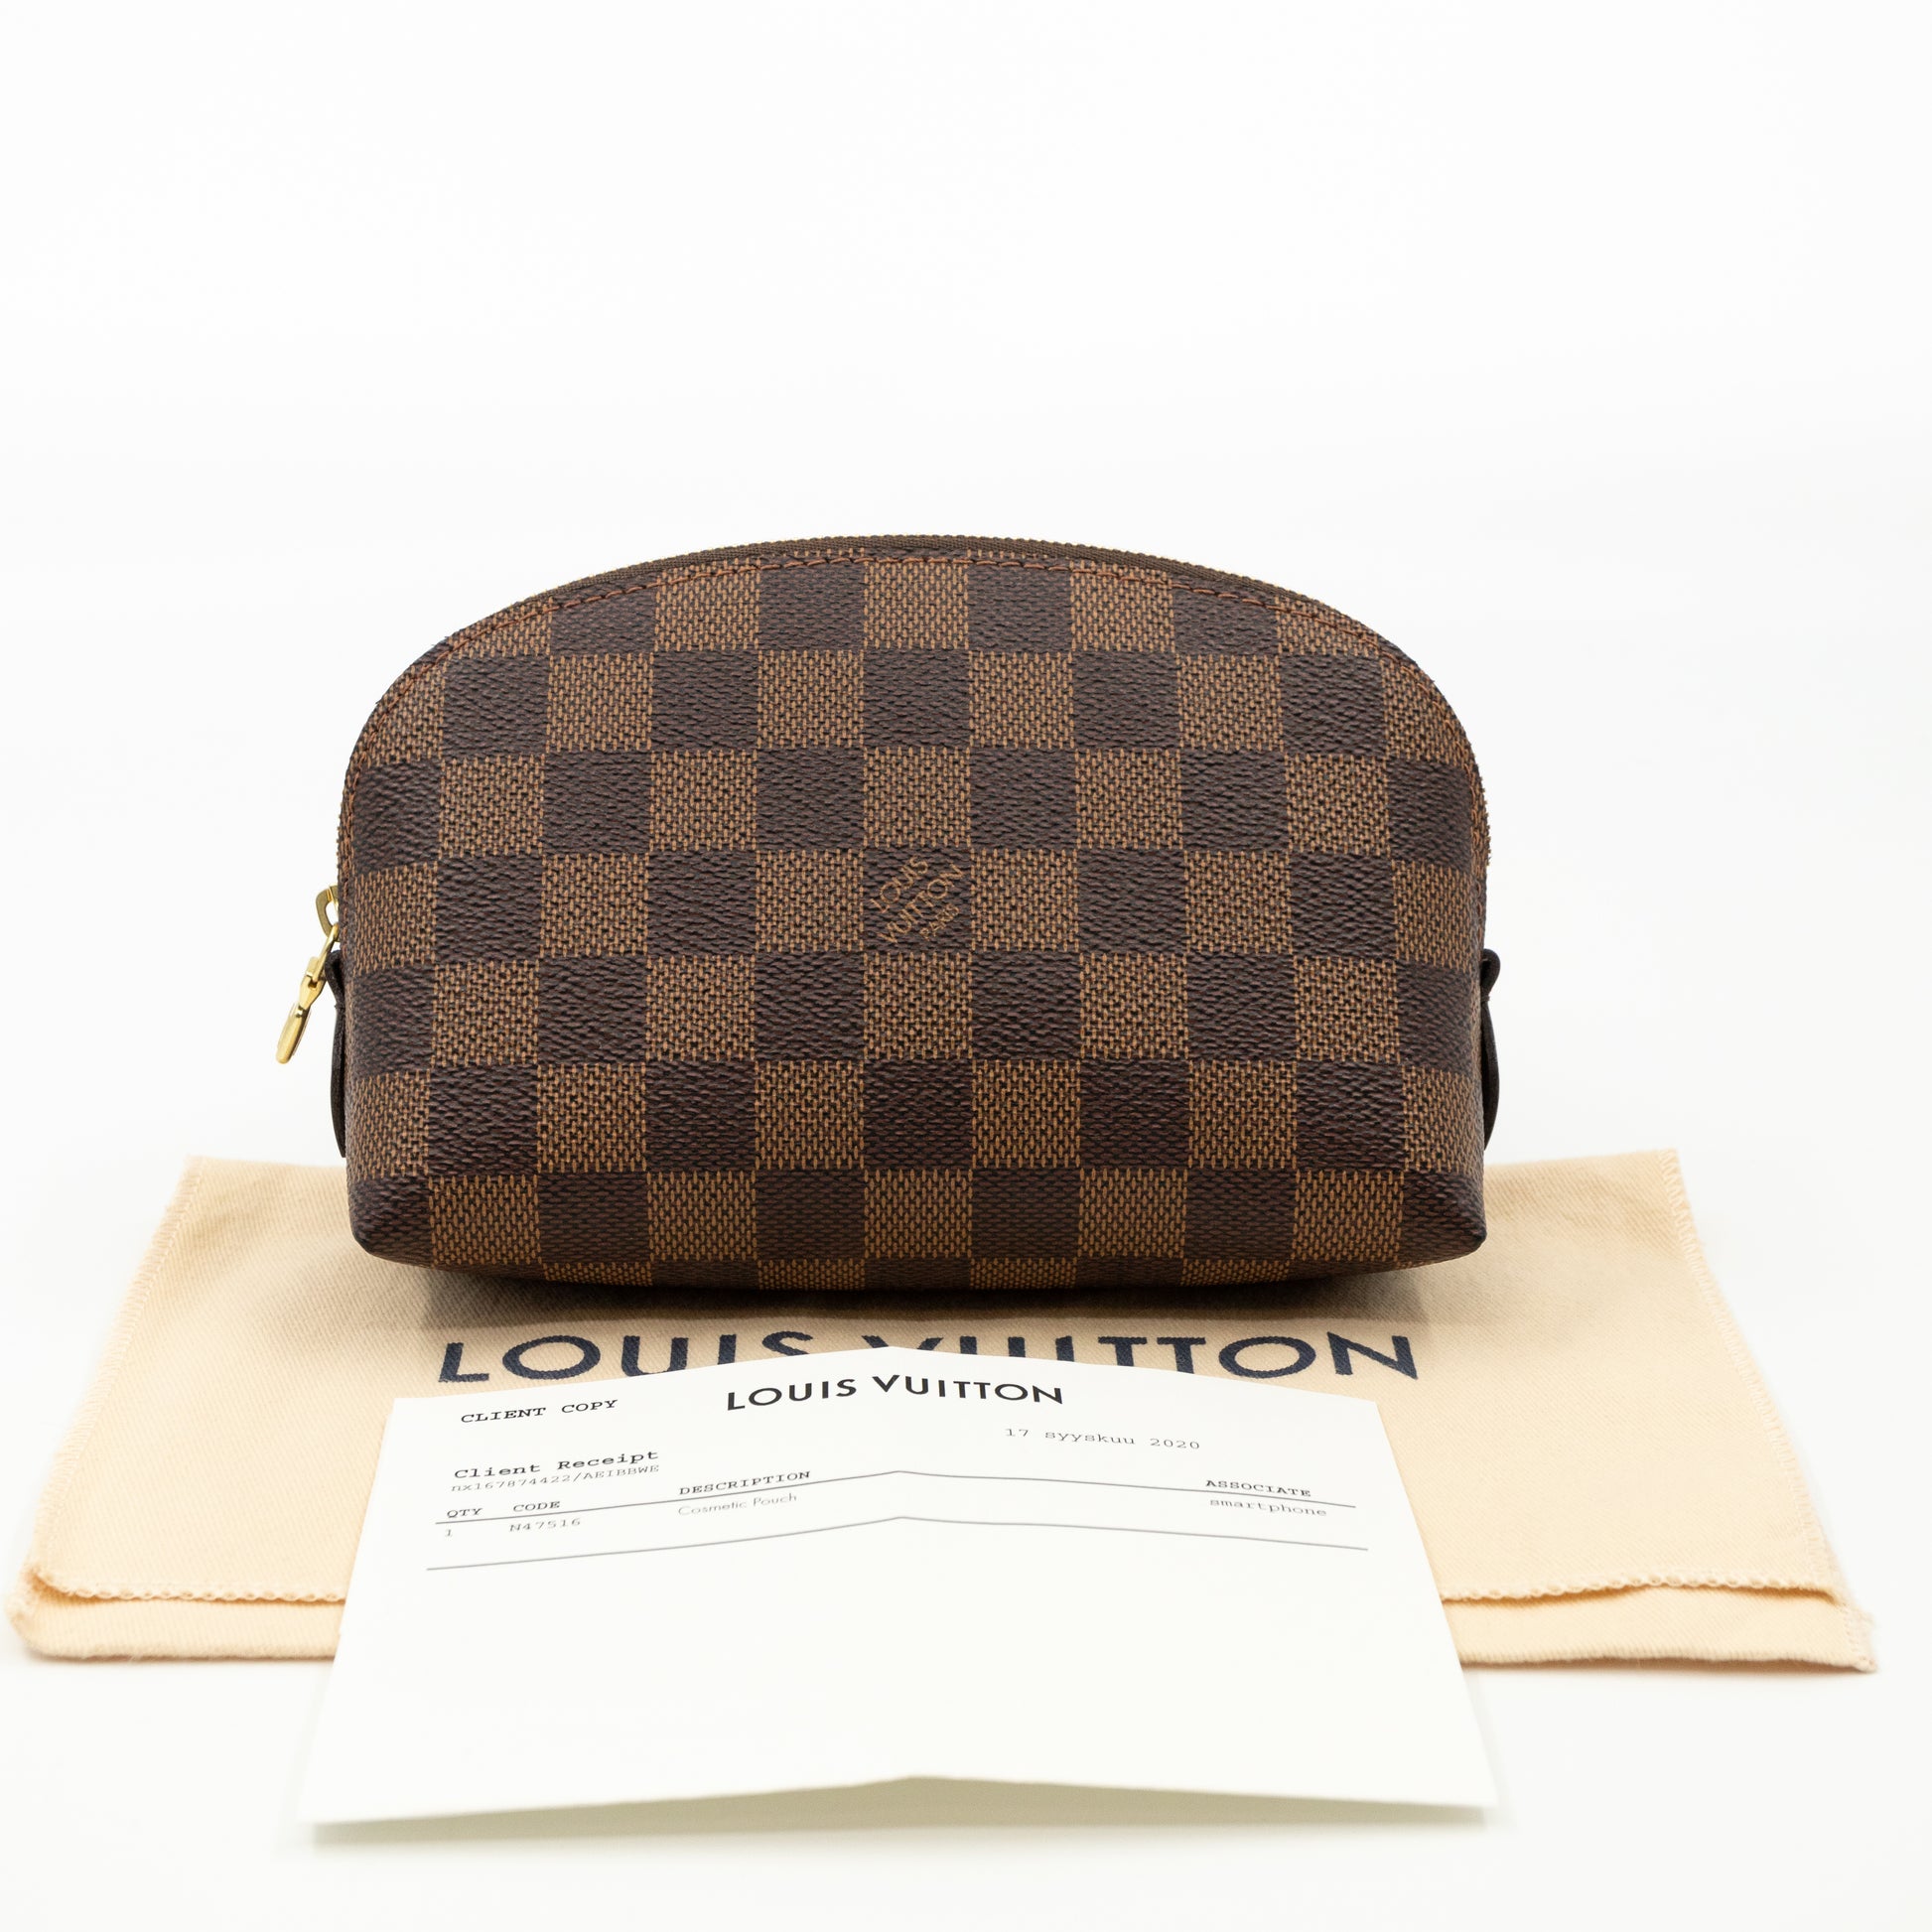 BRAND NEW!! AUTH MADE IN FRANCE Louis Vuitton Cosmetic Pouch PM Damier Azur